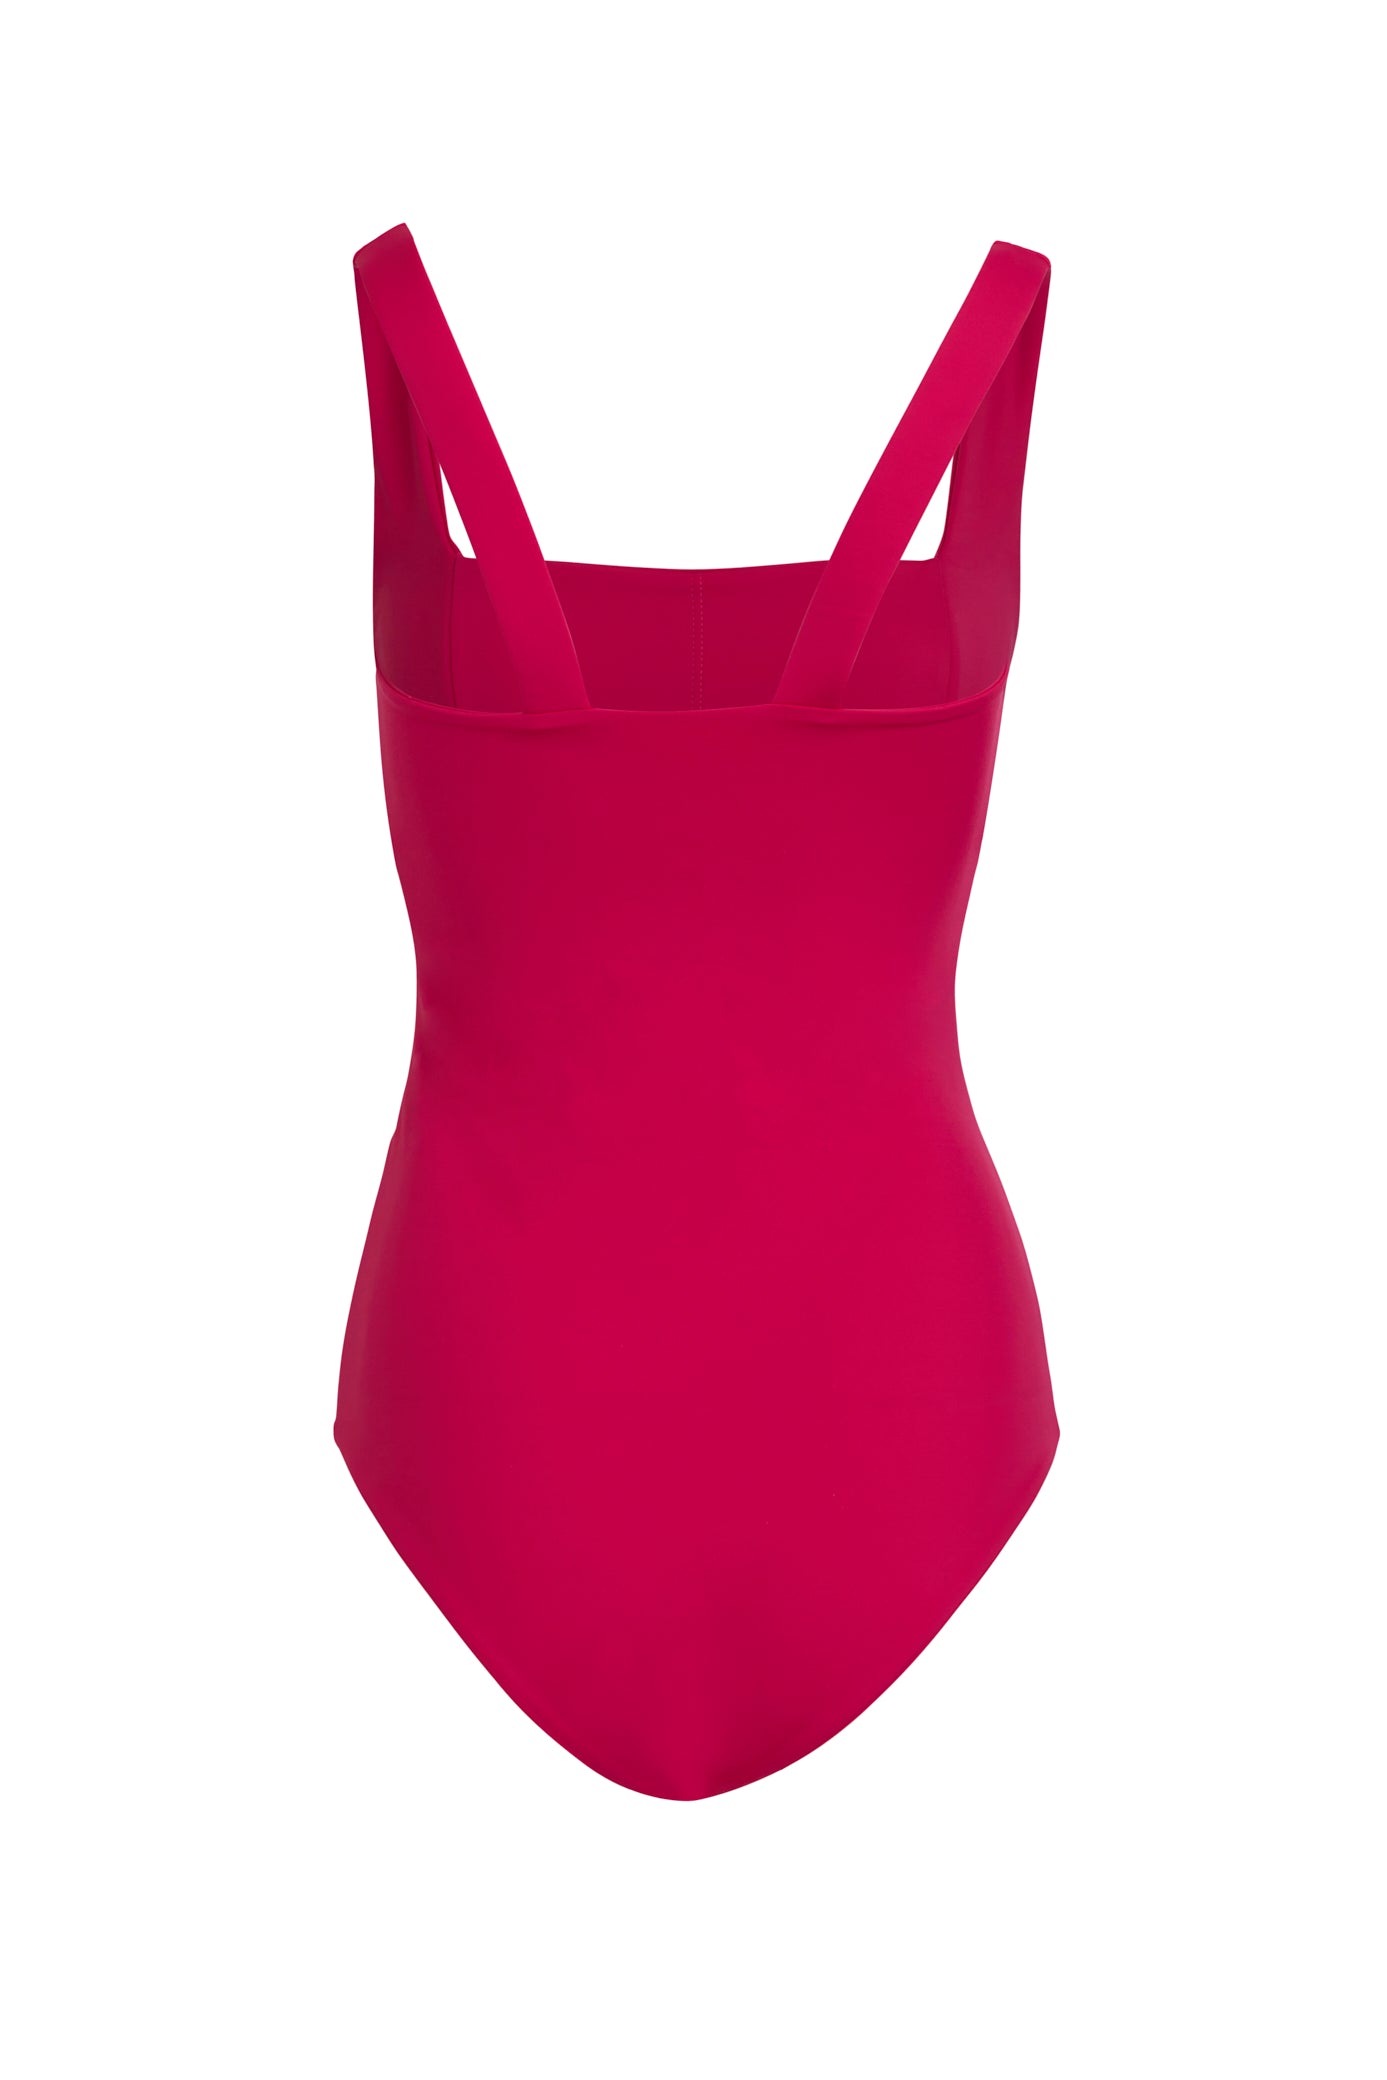 The Petra suit in Deep Pink